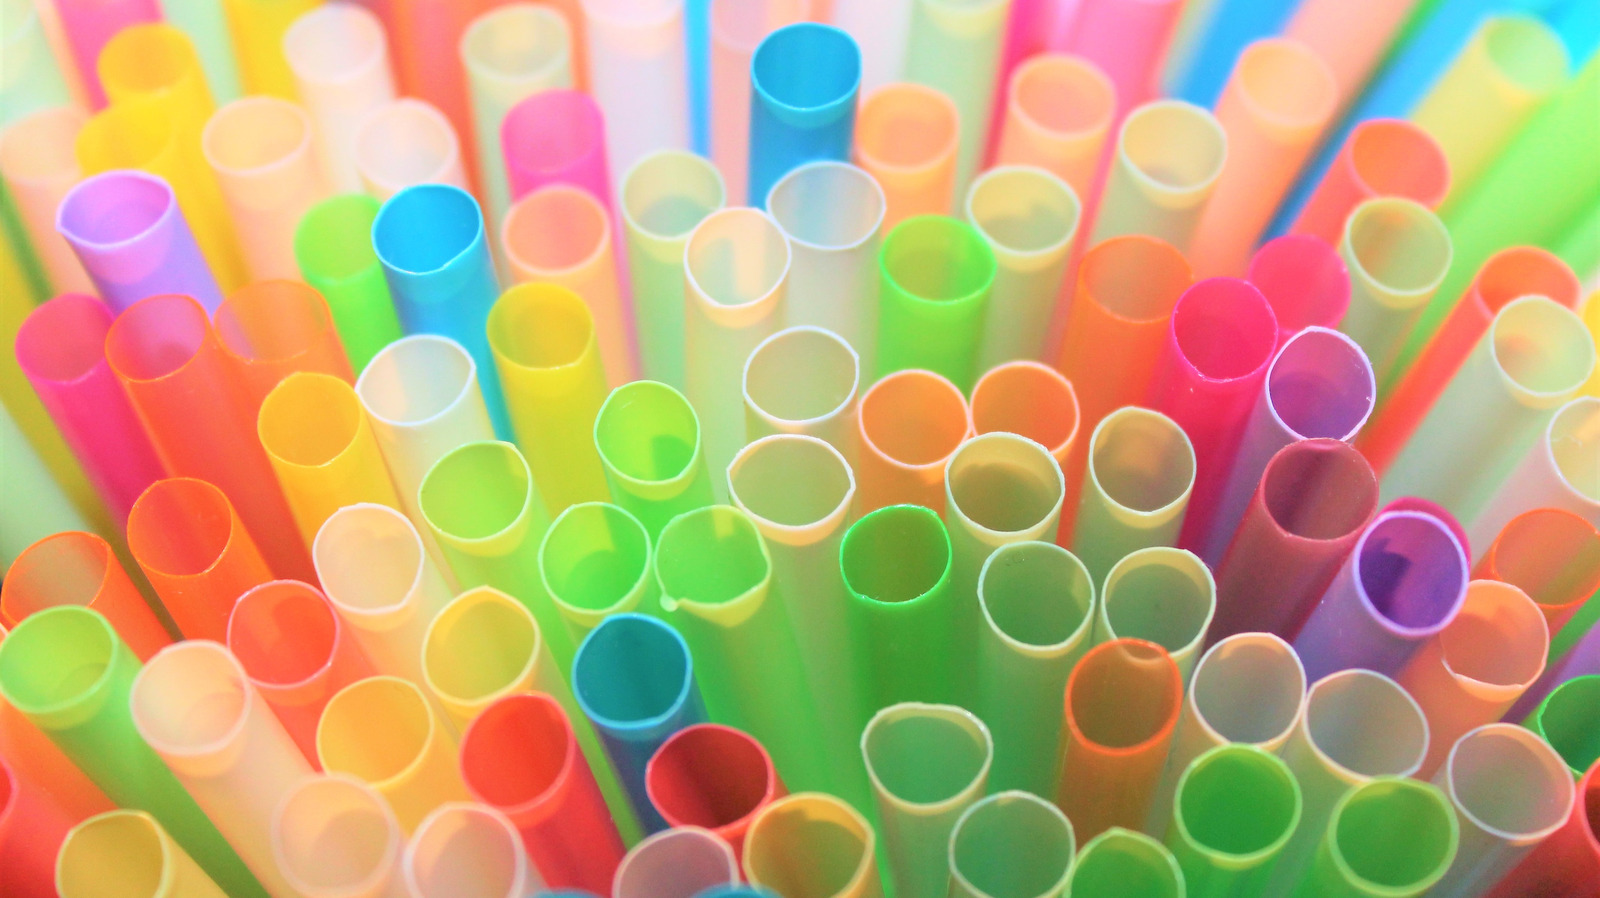 Last Straw For Plastic Straws? Cities, Restaurants Move To Toss These  Sippers : The Salt : NPR